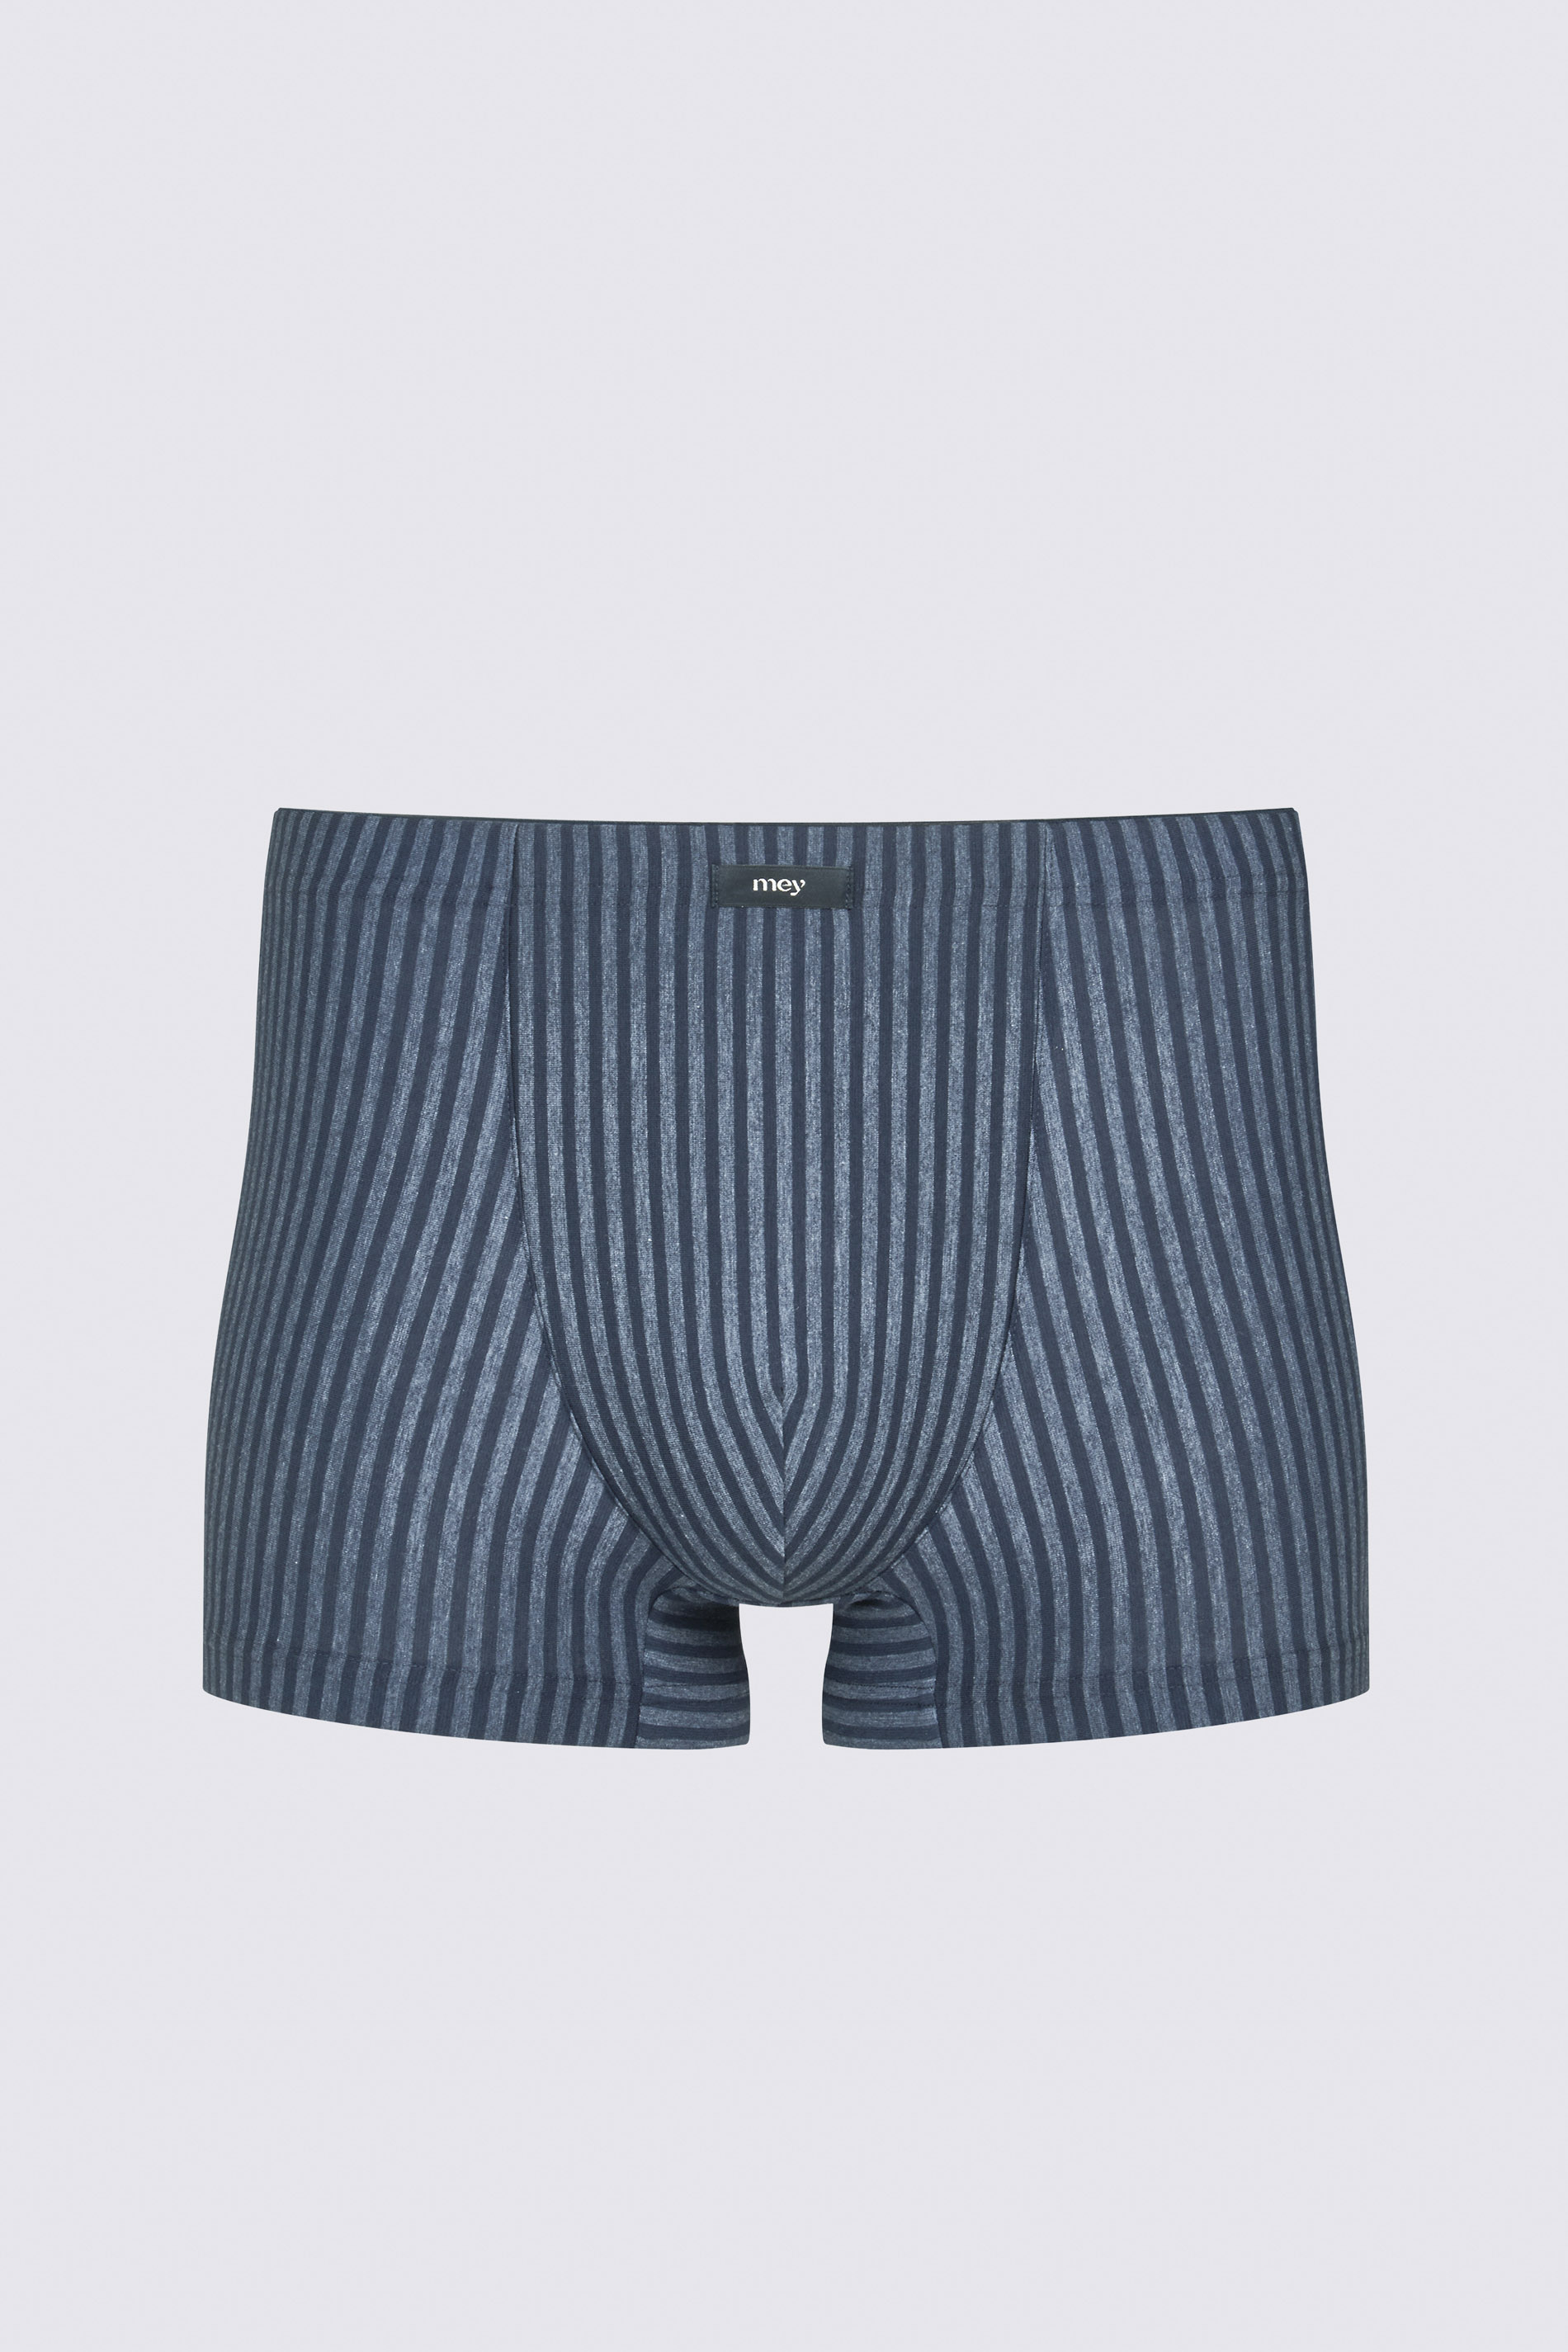 Shorty Yacht Blue Serie Tonal Stripes Uitknippen | mey®